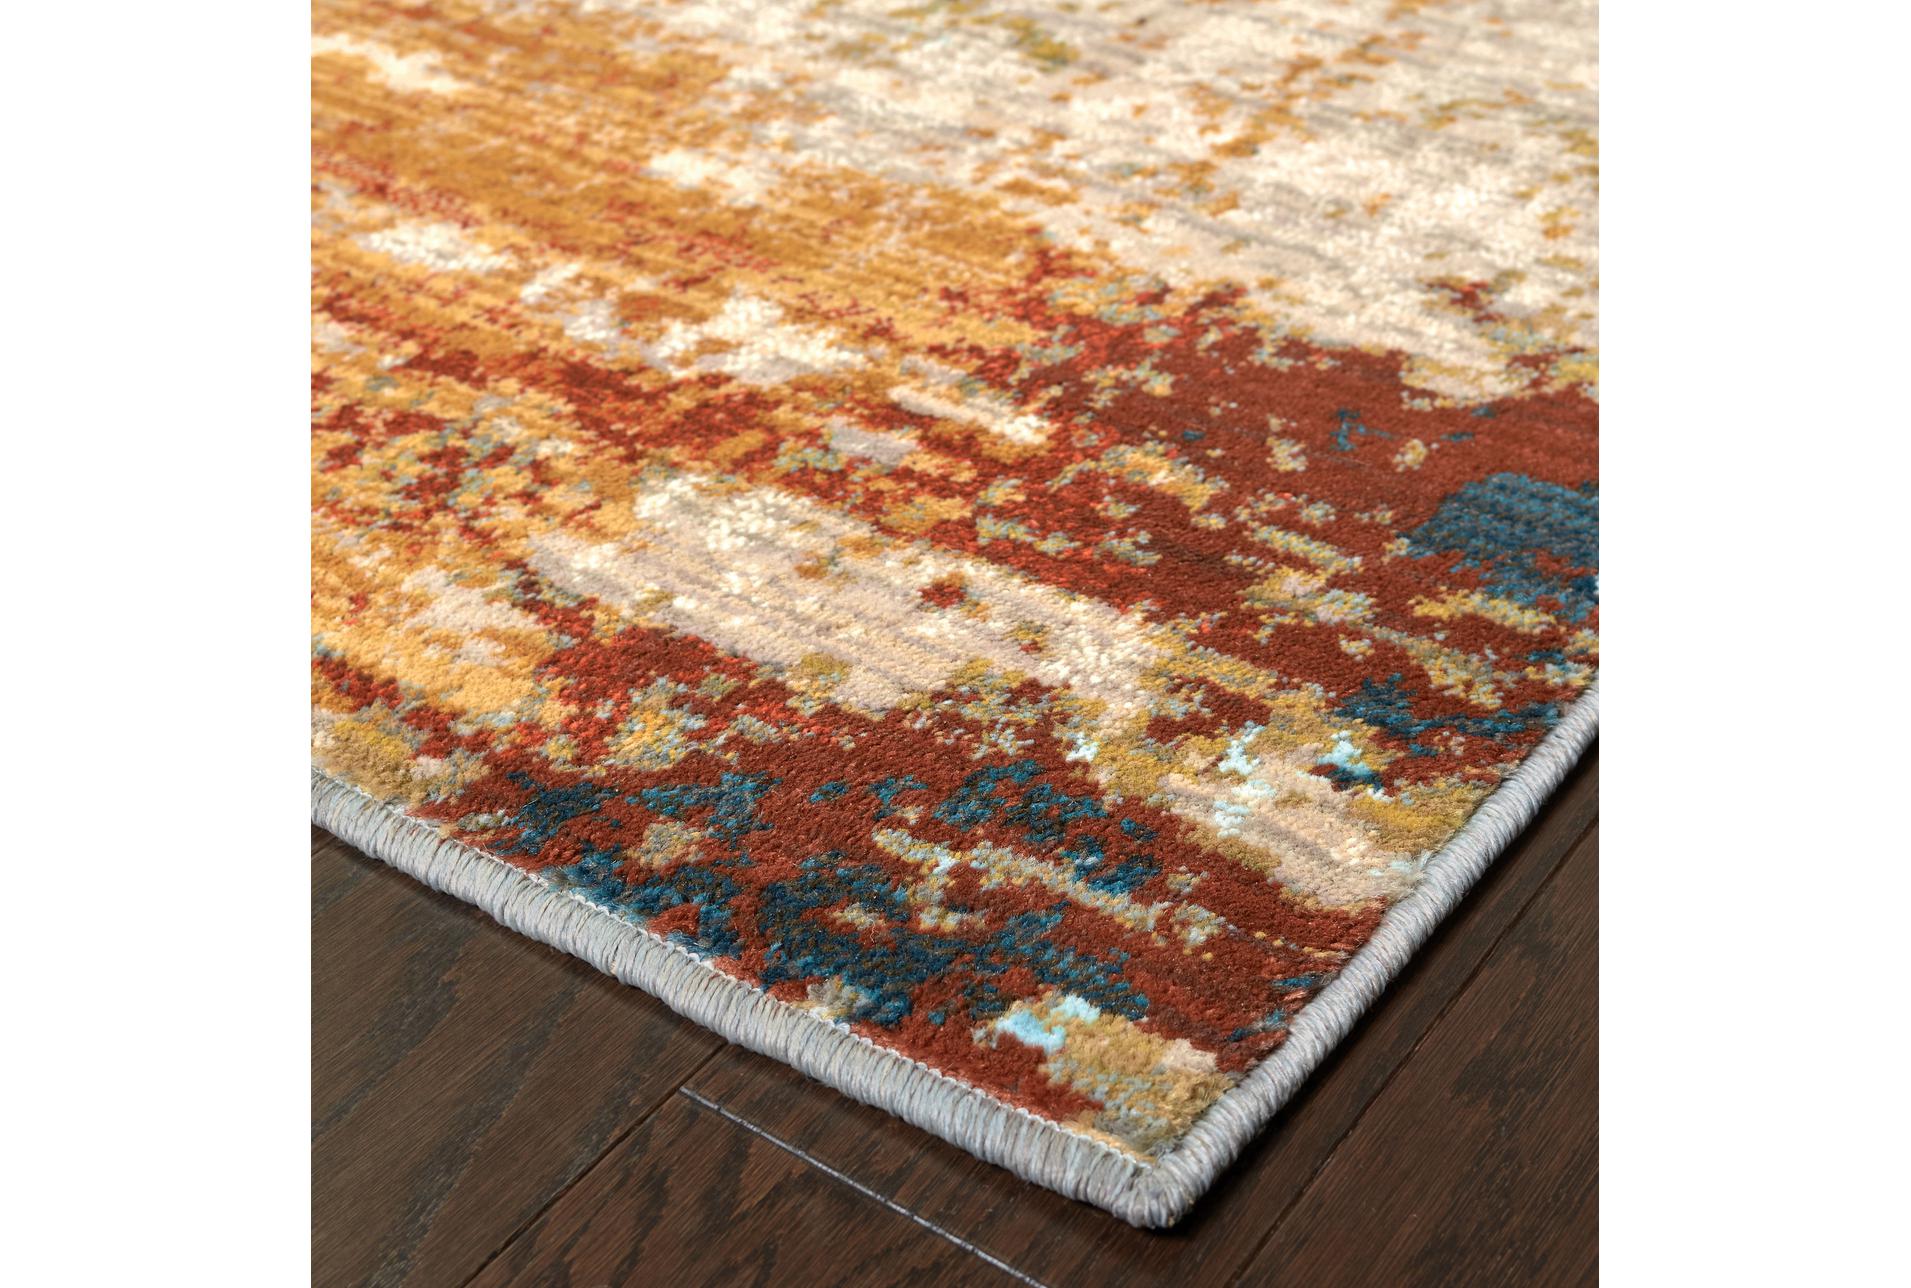 One Size Coja by Sofa4life Mahommes Area Rug Multi-Color